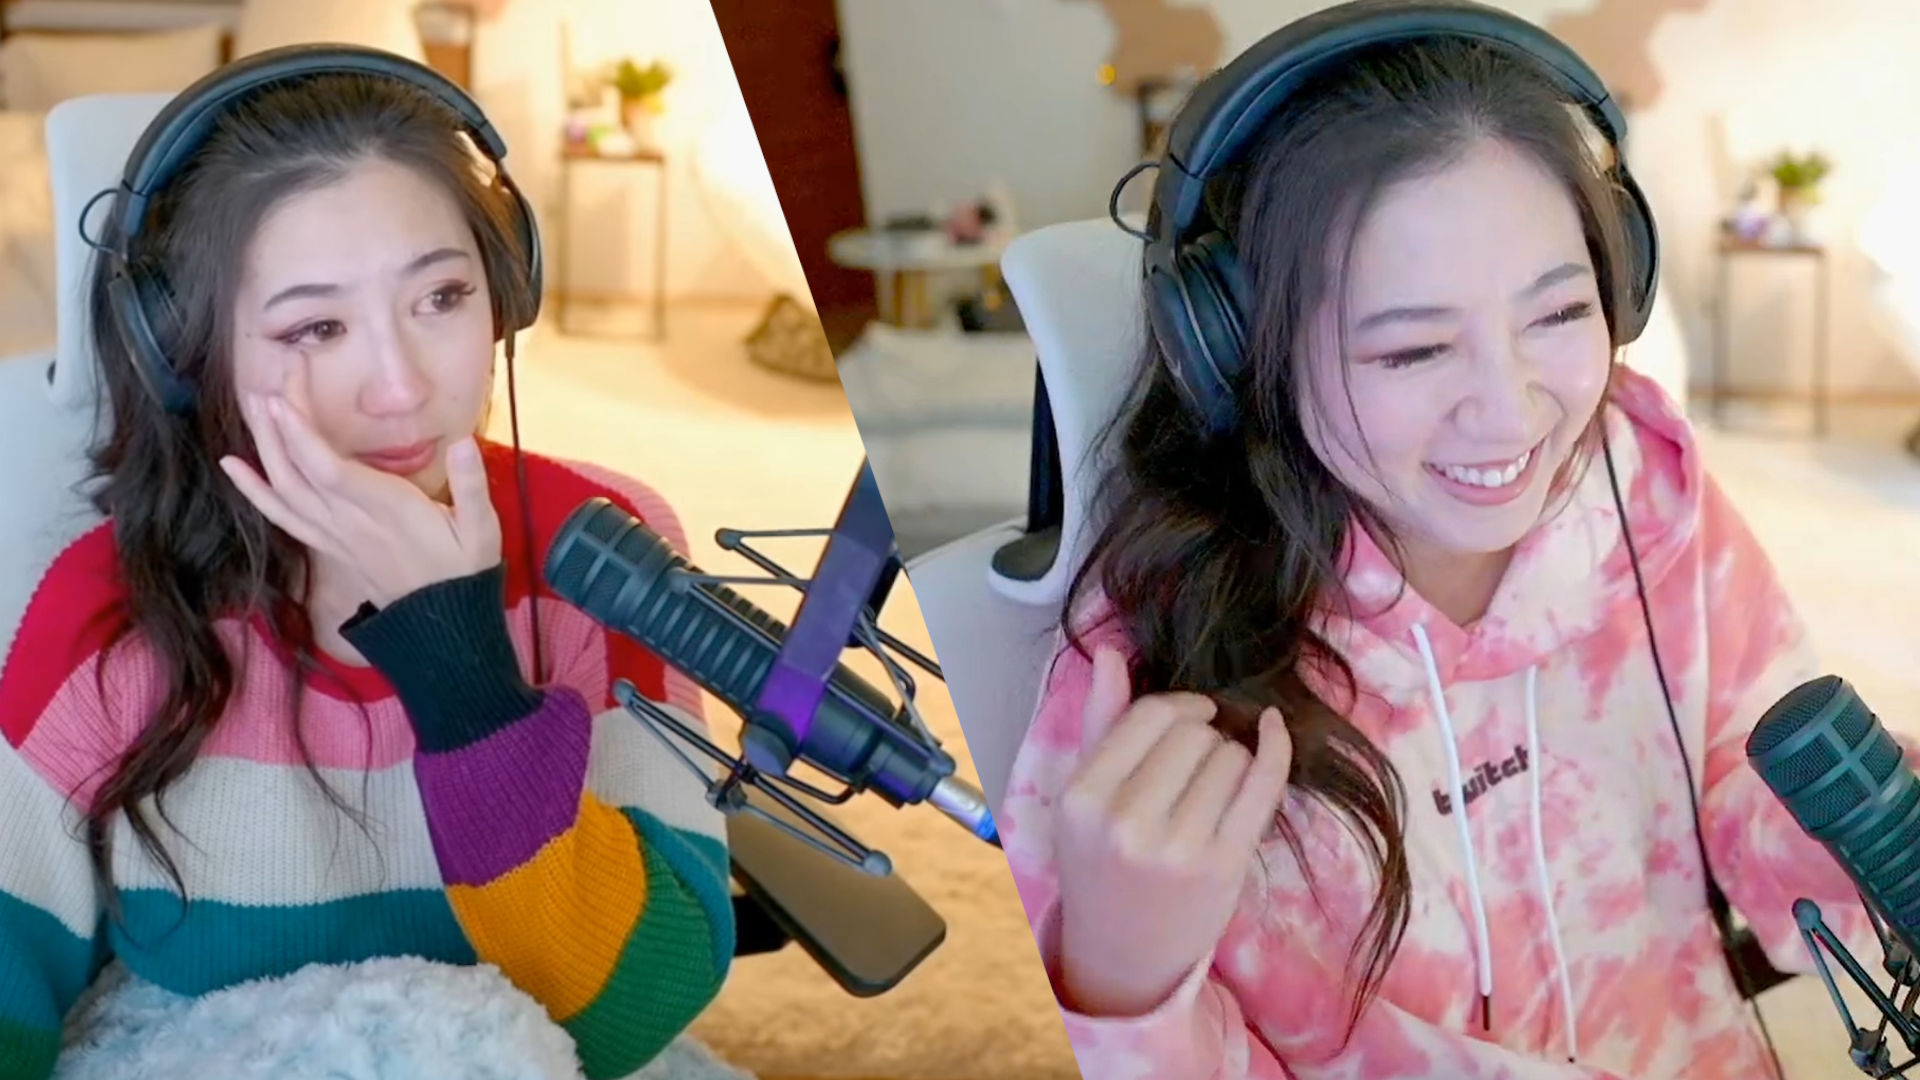 29-year-old cries live on Twitch because she is so moved by everything – wild speculation immediately arises